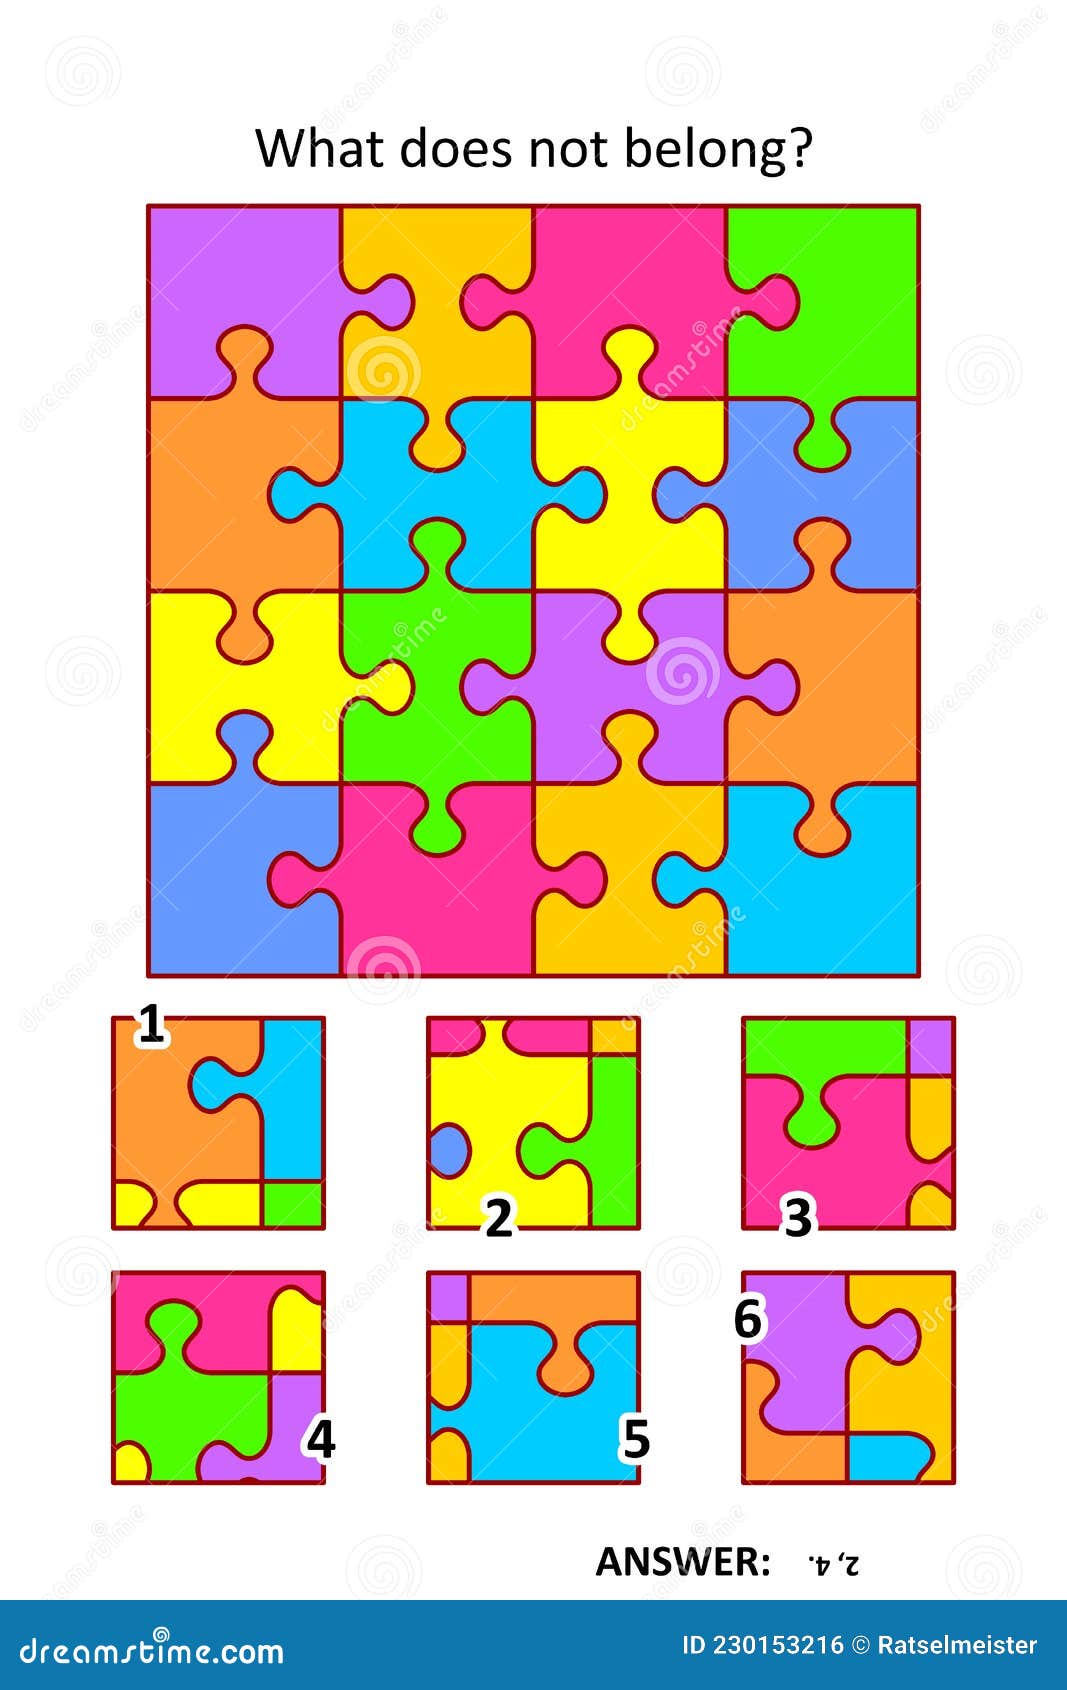 visual puzzle with picture fragments. abstract jigsaw puzzle  pattern. what does not belong?